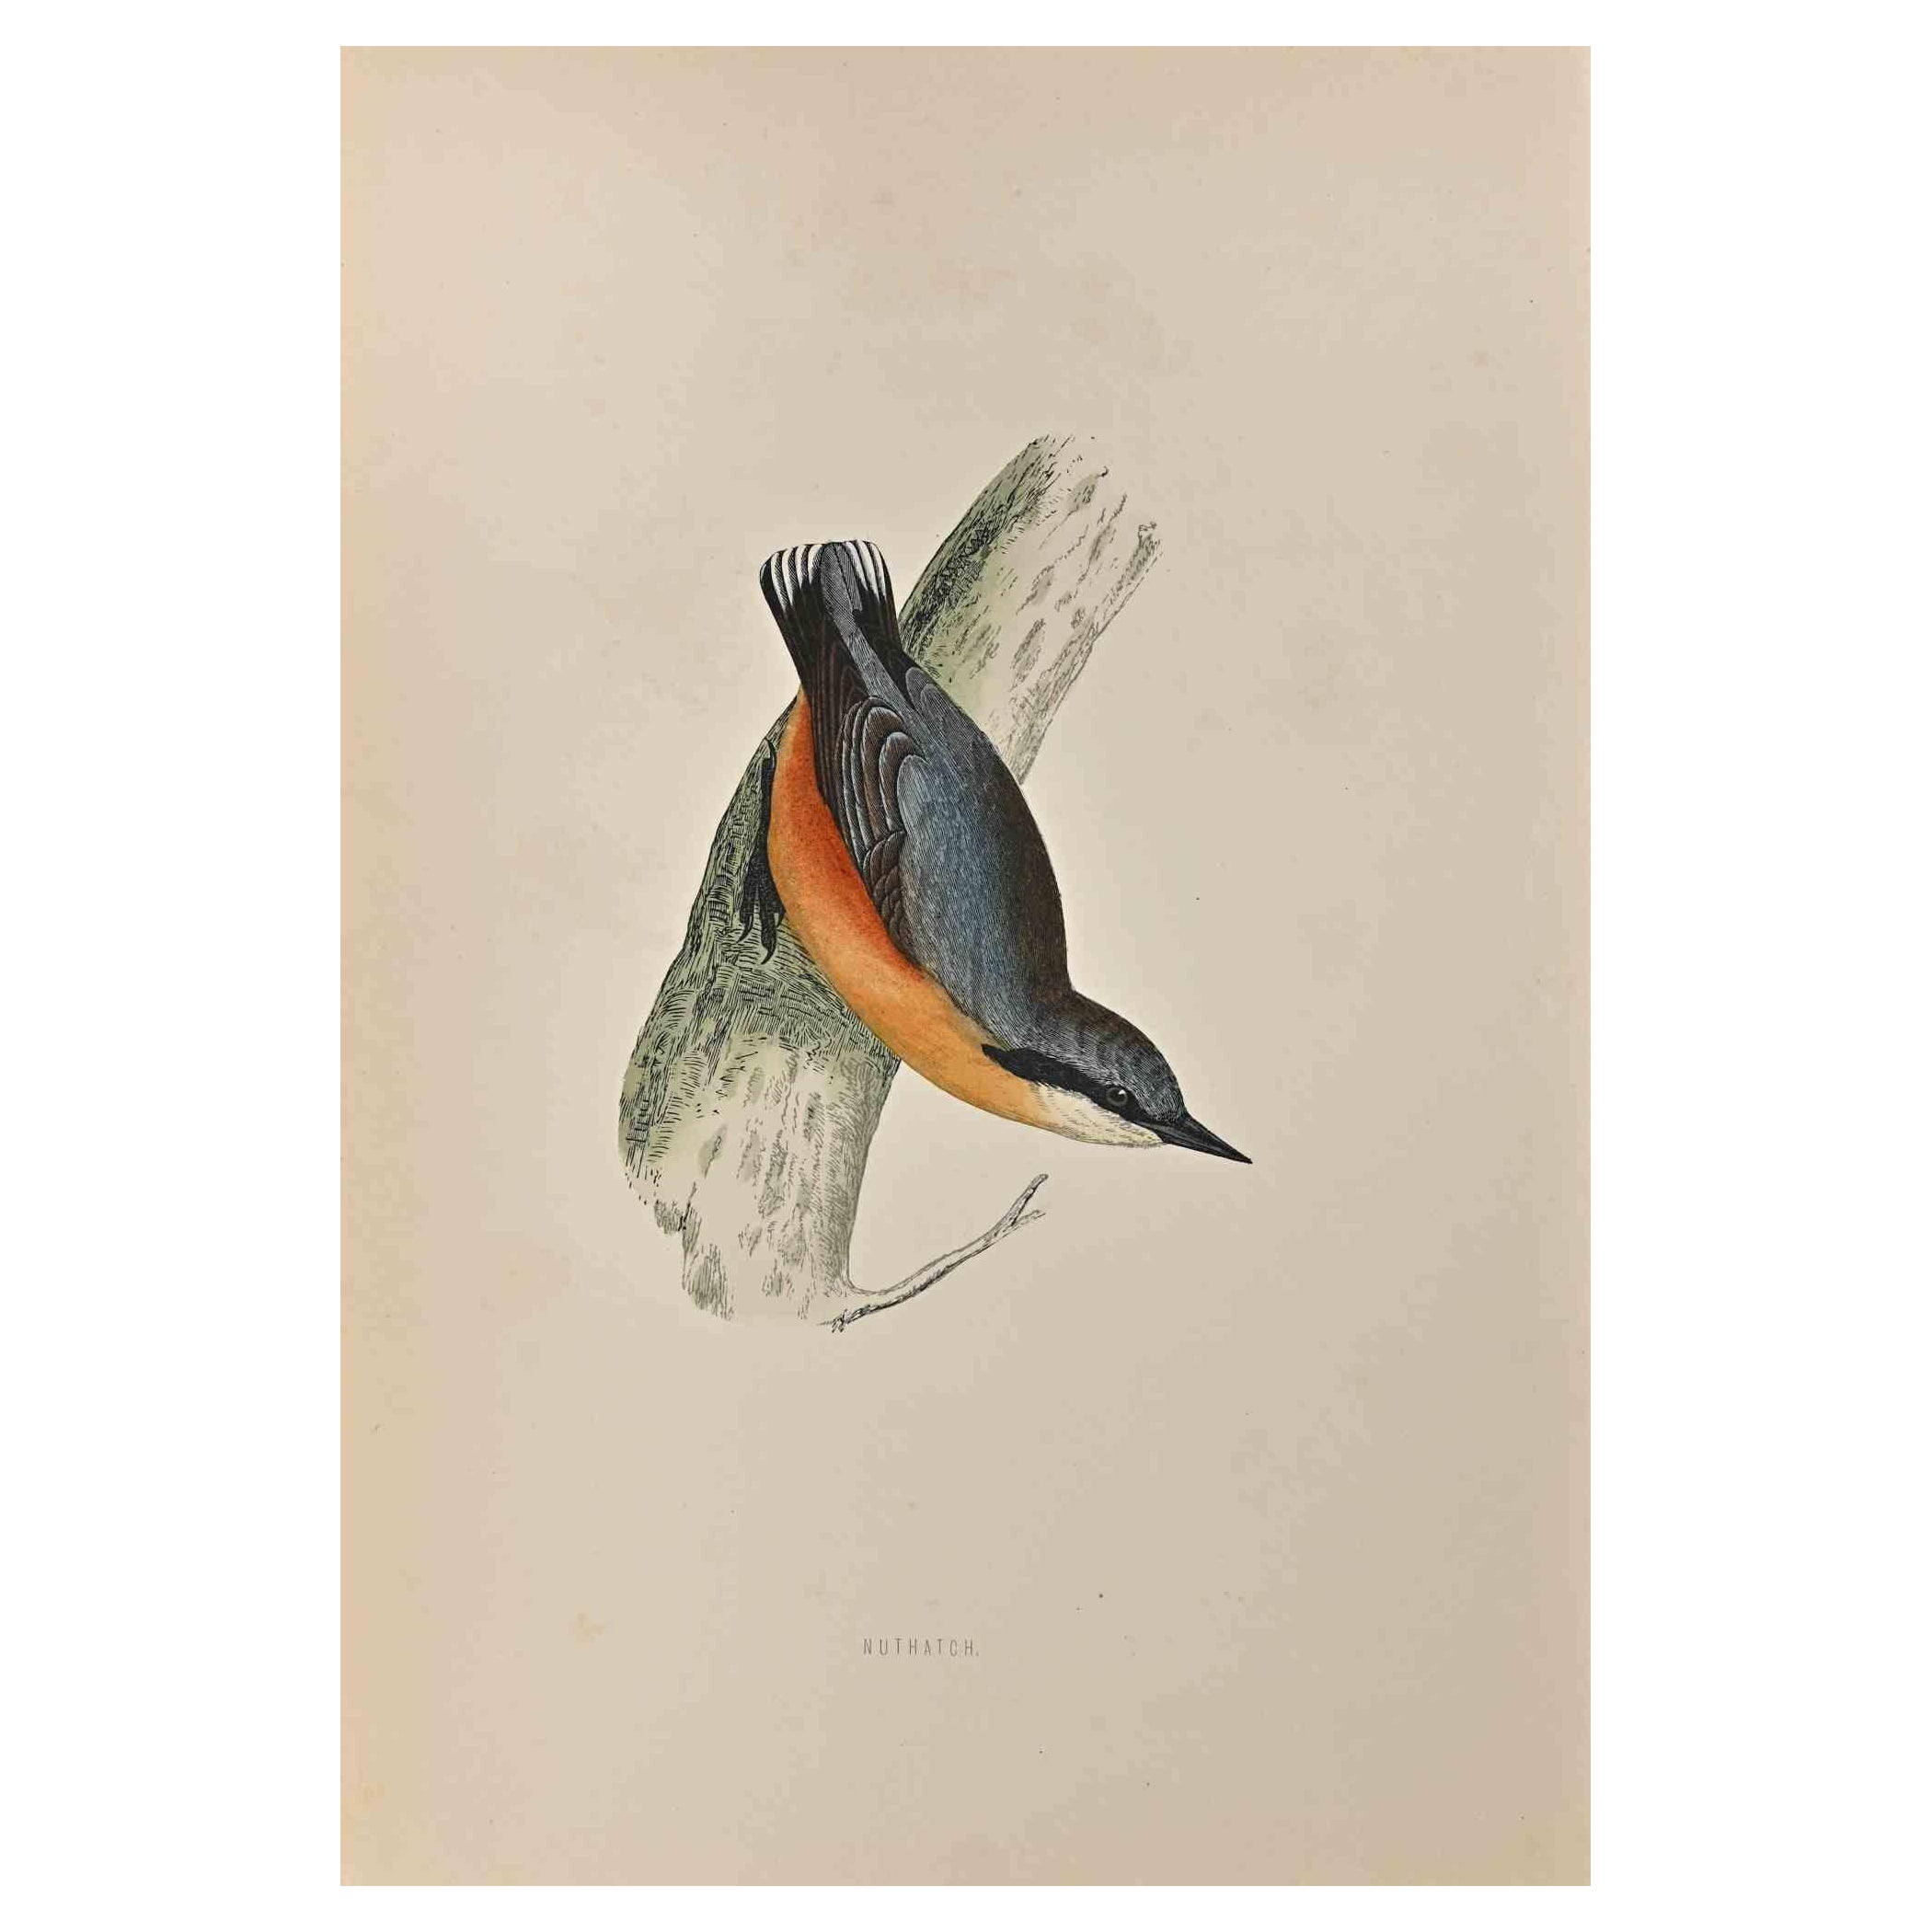 Nuthatch is a modern artwork realized in 1870 by the British artist Alexander Francis Lydon (1836-1917) . 

Woodcut print, hand colored, published by London, Bell & Sons, 1870.  Name of the bird printed in plate. This work is part of a print suite